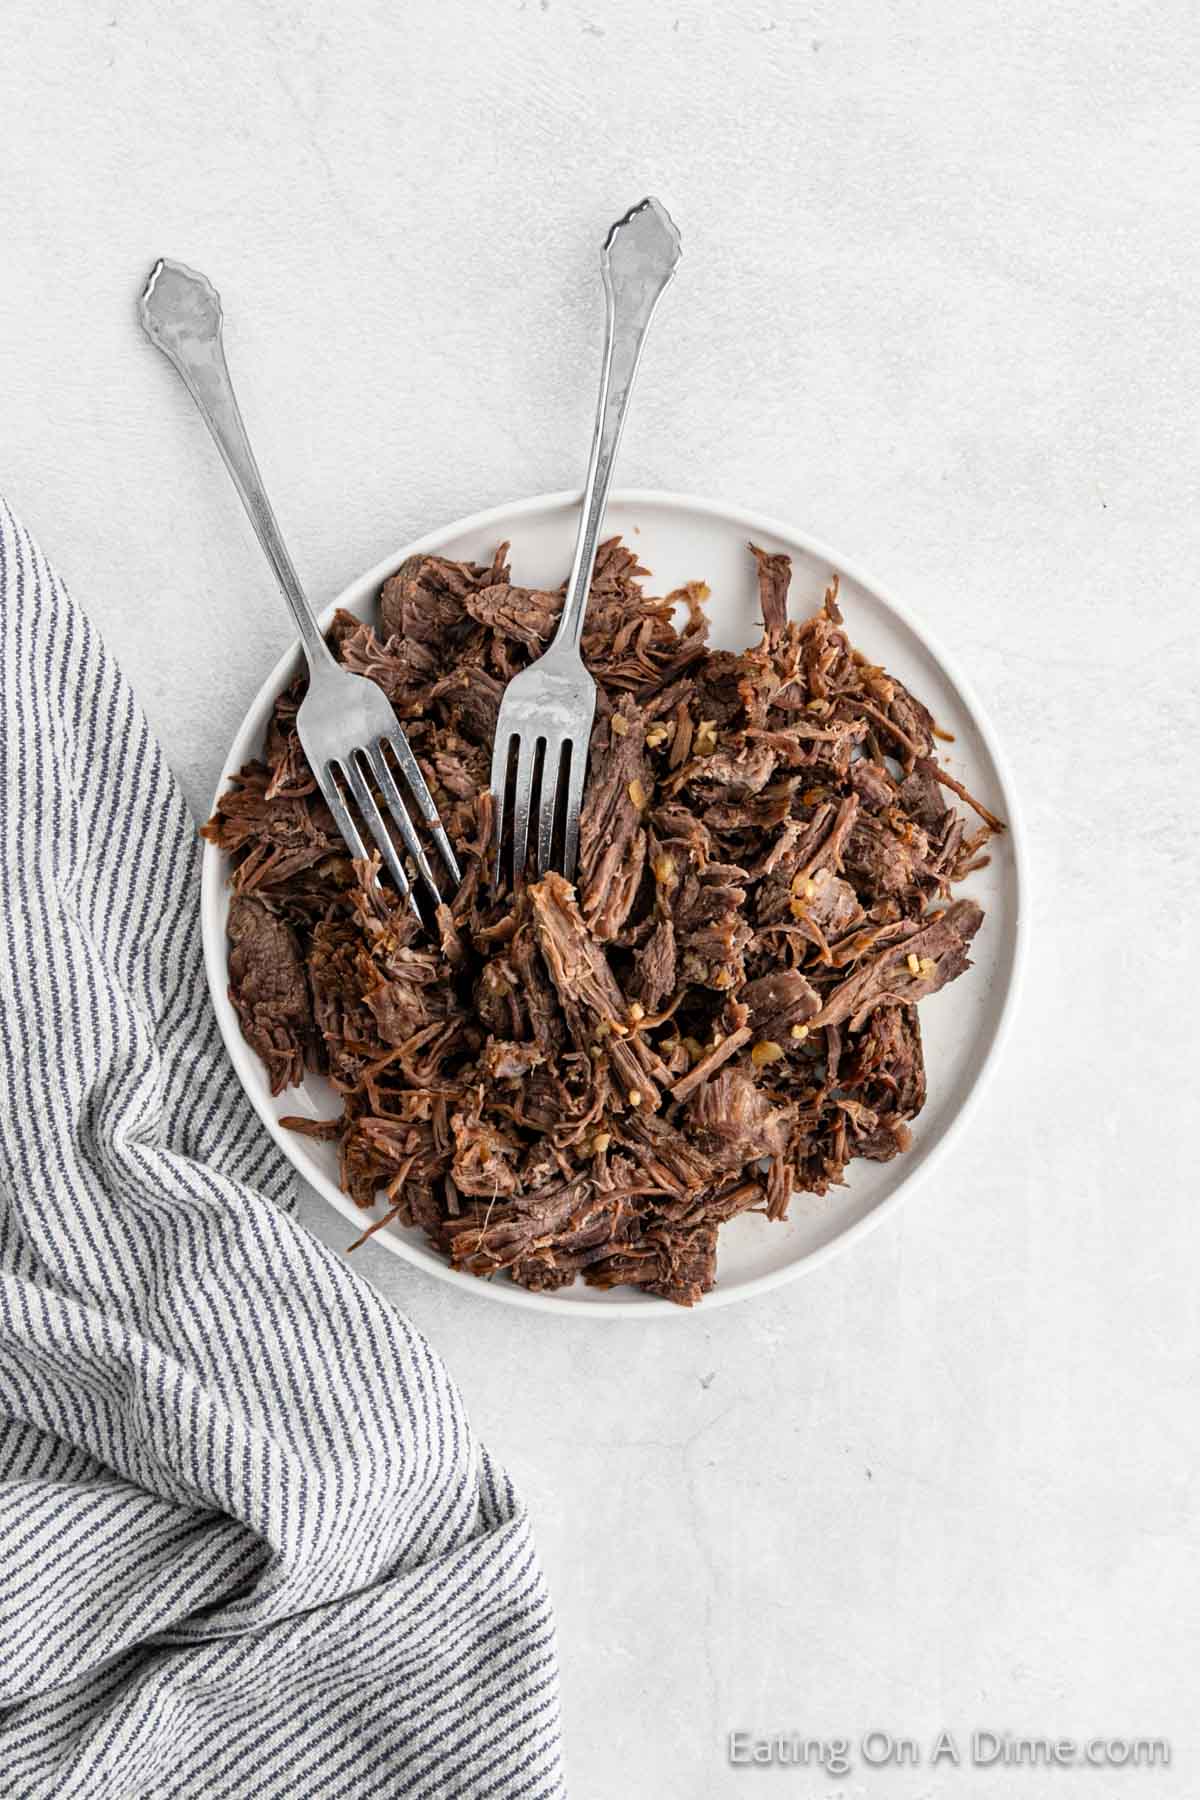 Shredded beef on a plate with two forks